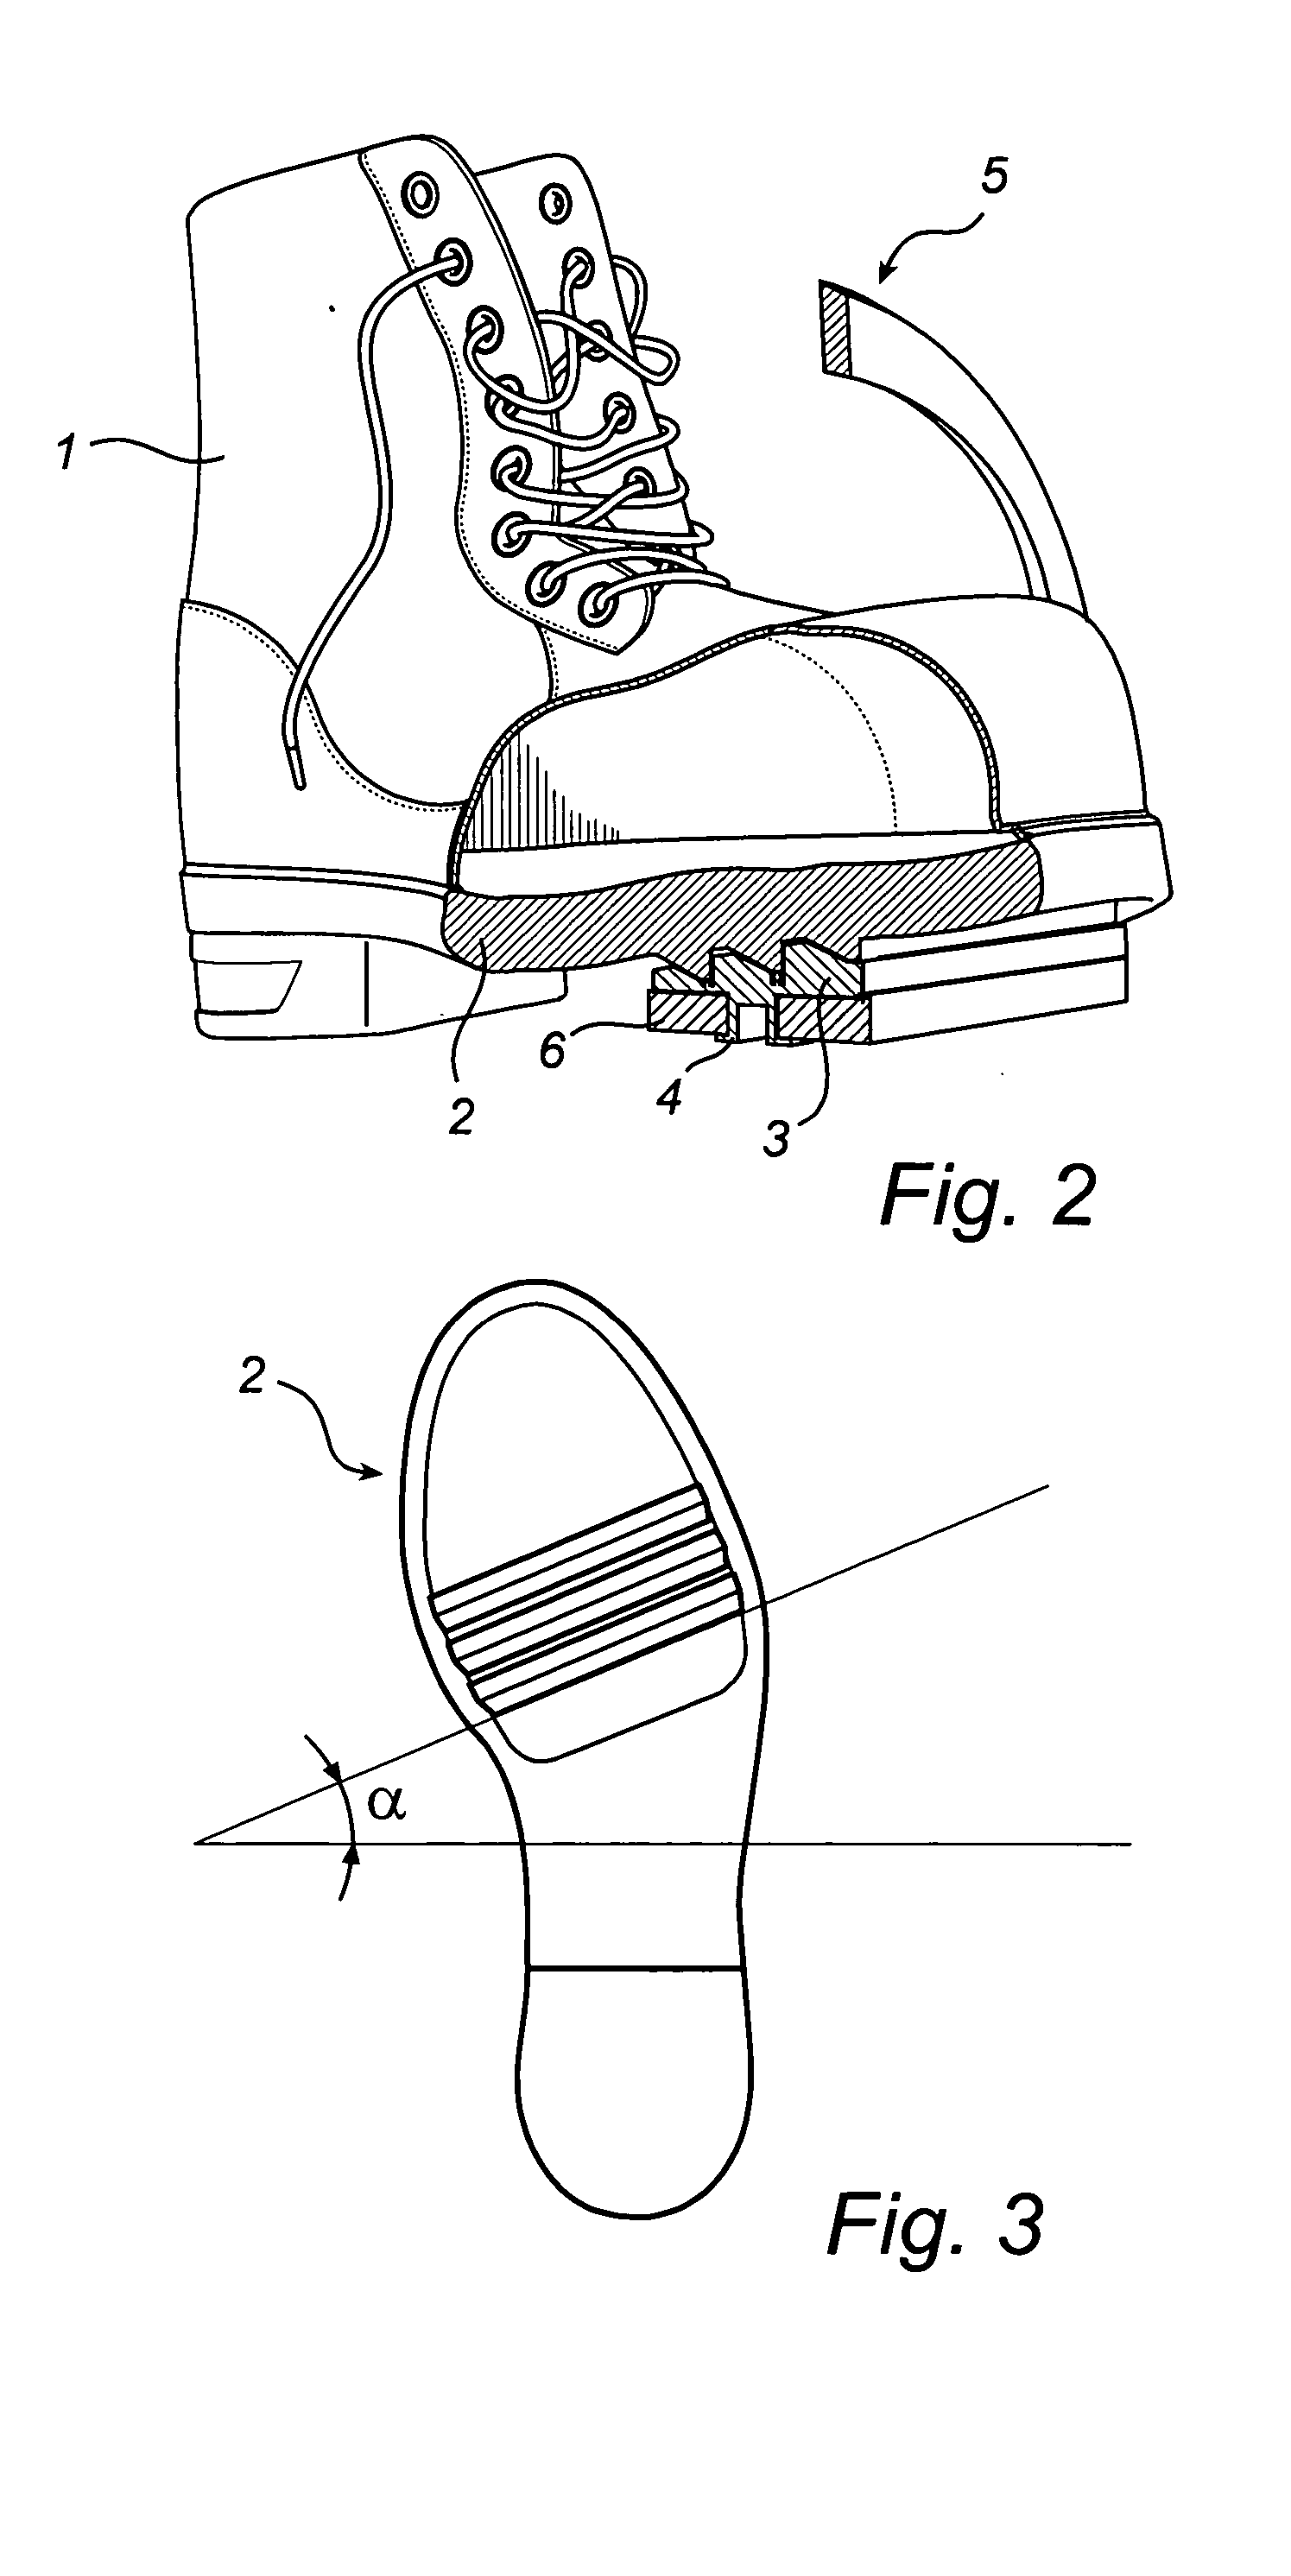 System in connection with a stirrup